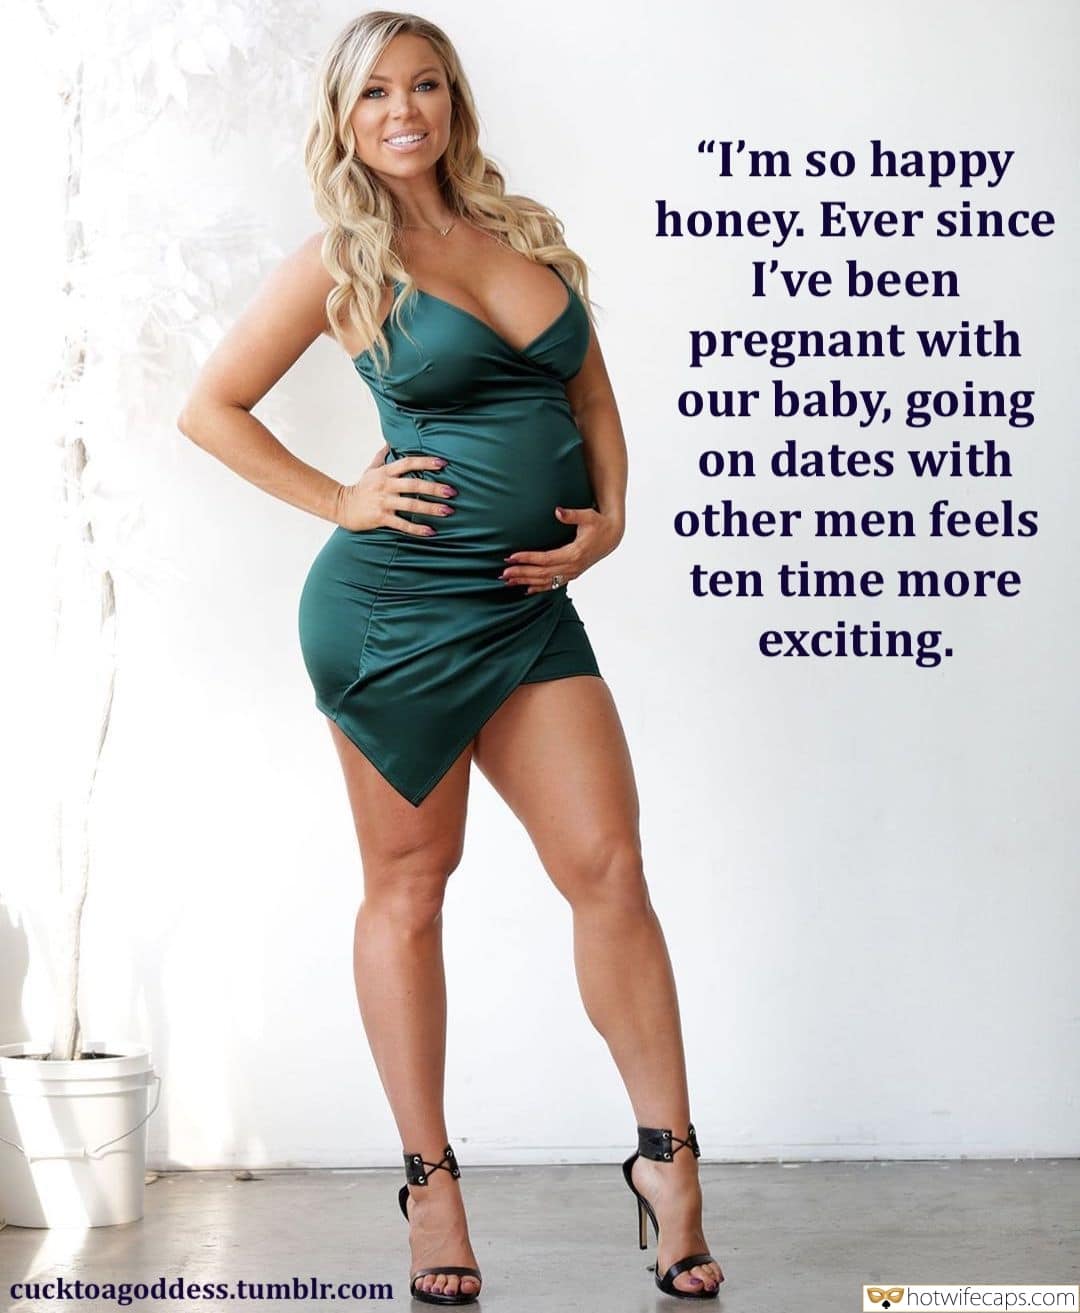 Sexy Memes Humiliation hotwife caption: “I’m so happy honey. Ever since I’ve been pregnant with our baby, going on dates with other men feels ten time more exciting. cucktoagoddess.tumblr.com Hotwife pregnant sex captions Molesting pregnant mom baby caption porn Voluptuous Pregnant Blonde in Green Dress